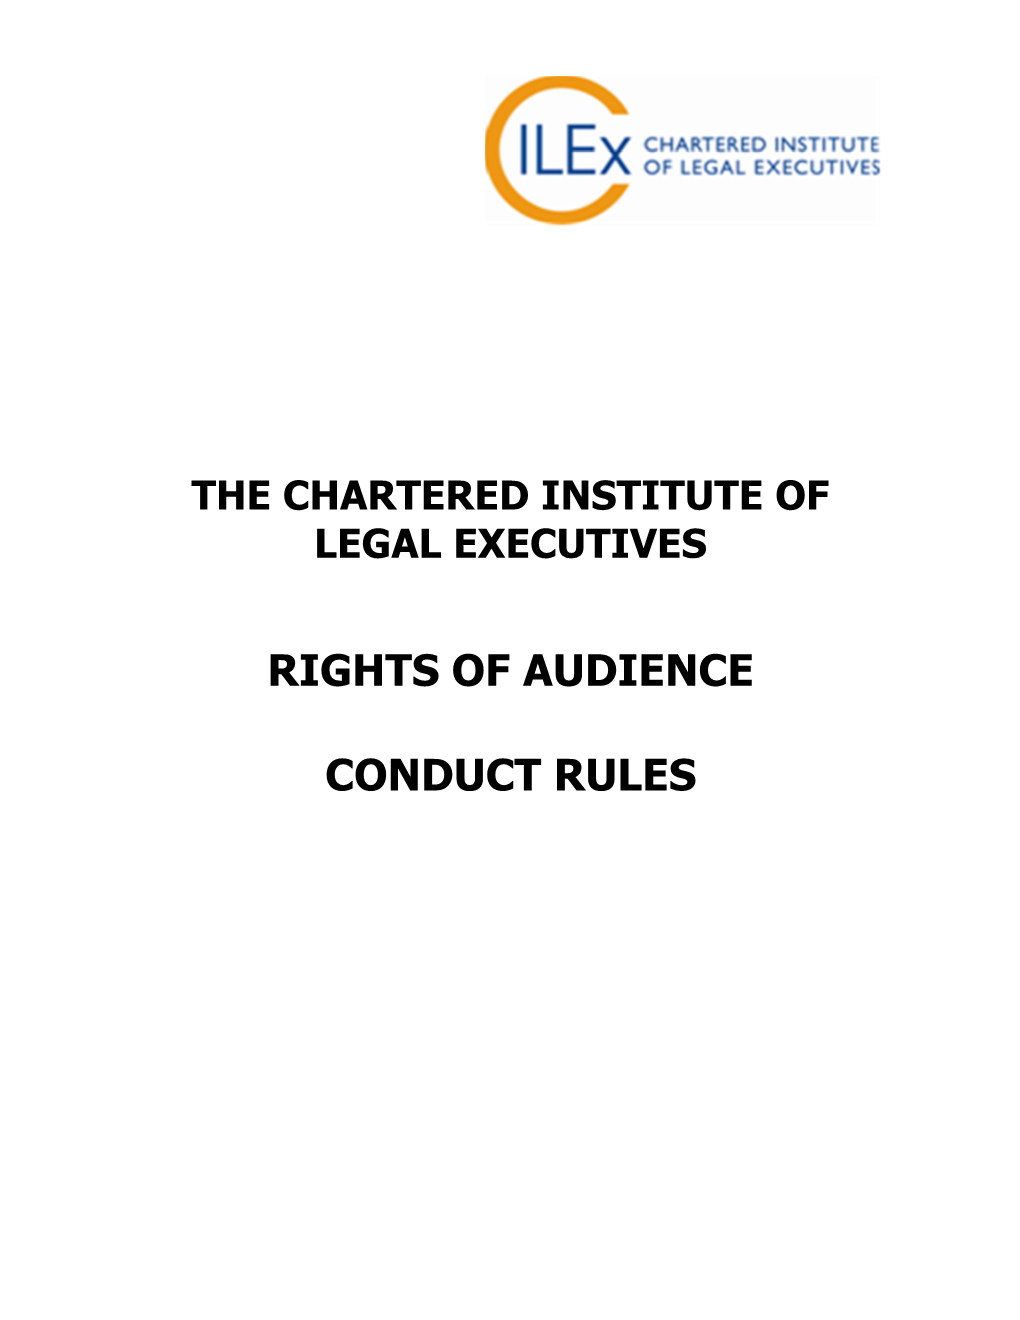 Rights of Audience Conduct Rules